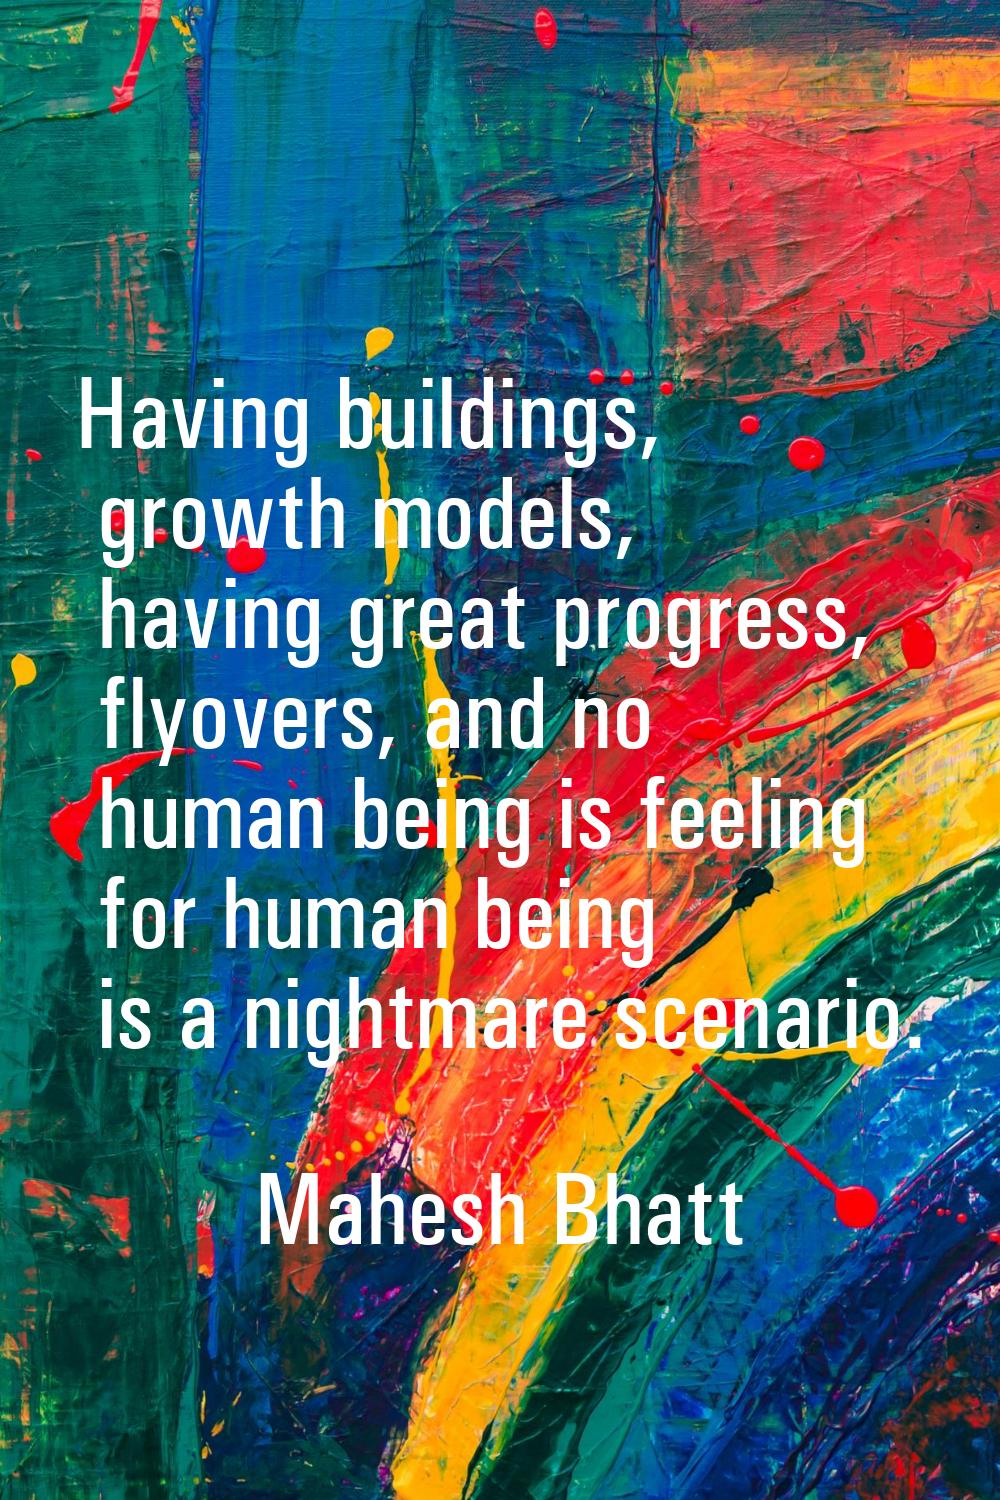 Having buildings, growth models, having great progress, flyovers, and no human being is feeling for